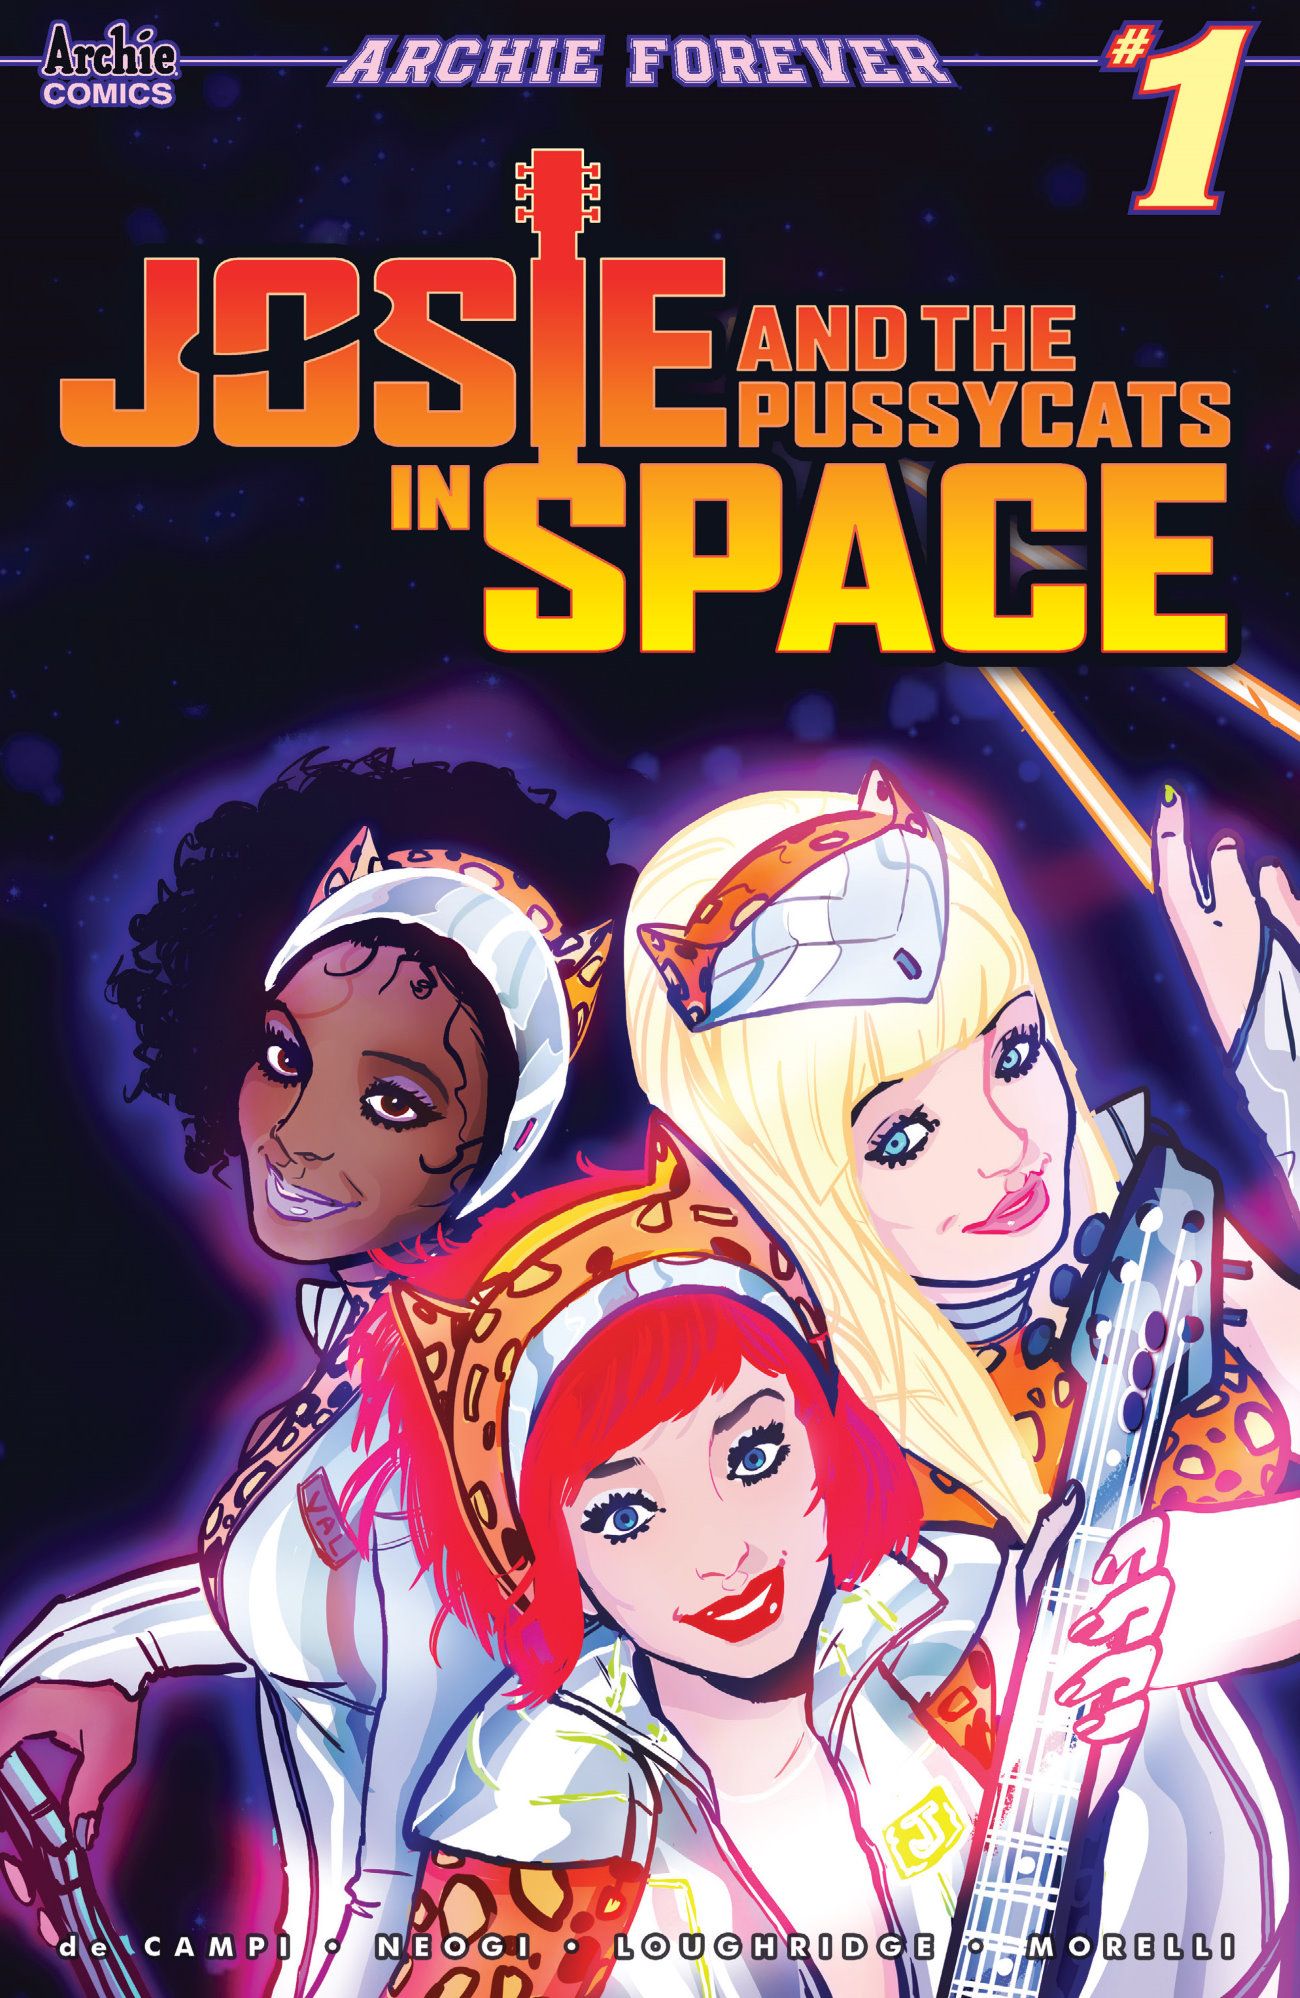 Josie & The Pussycats Are Going To SPACE This Halloween